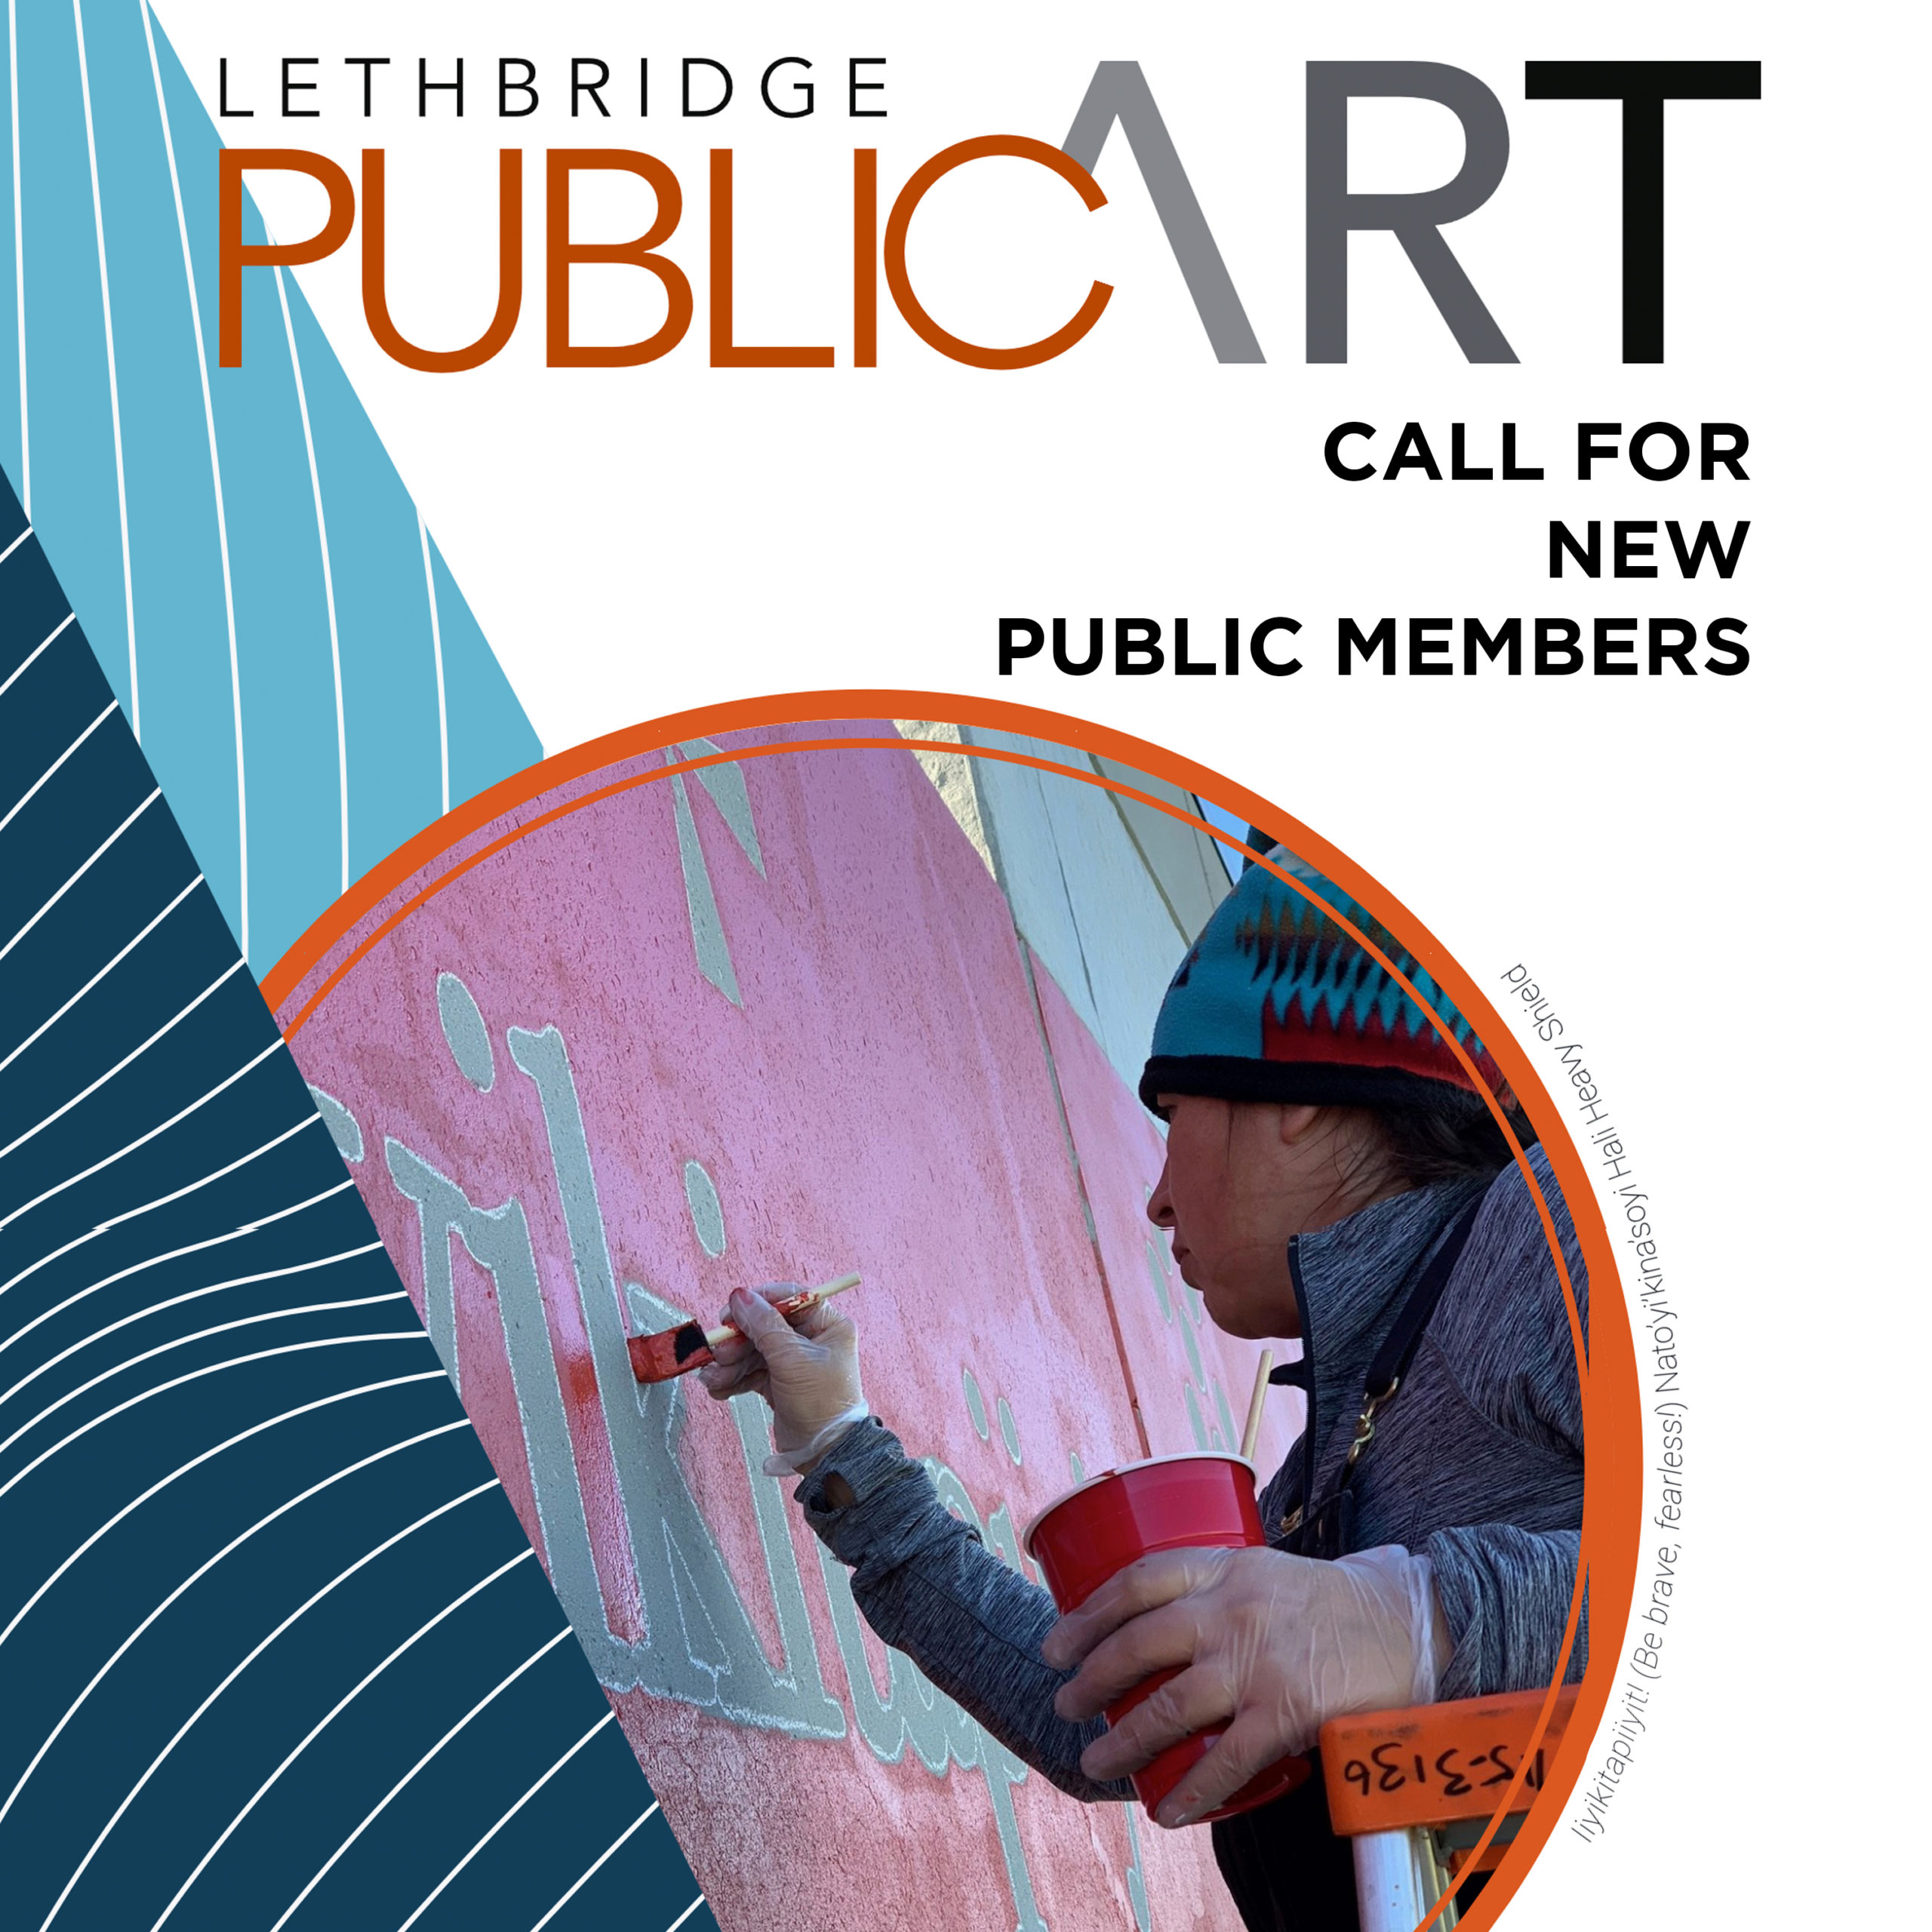 Call for New Public Members – City of Lethbridge Public Art Committee